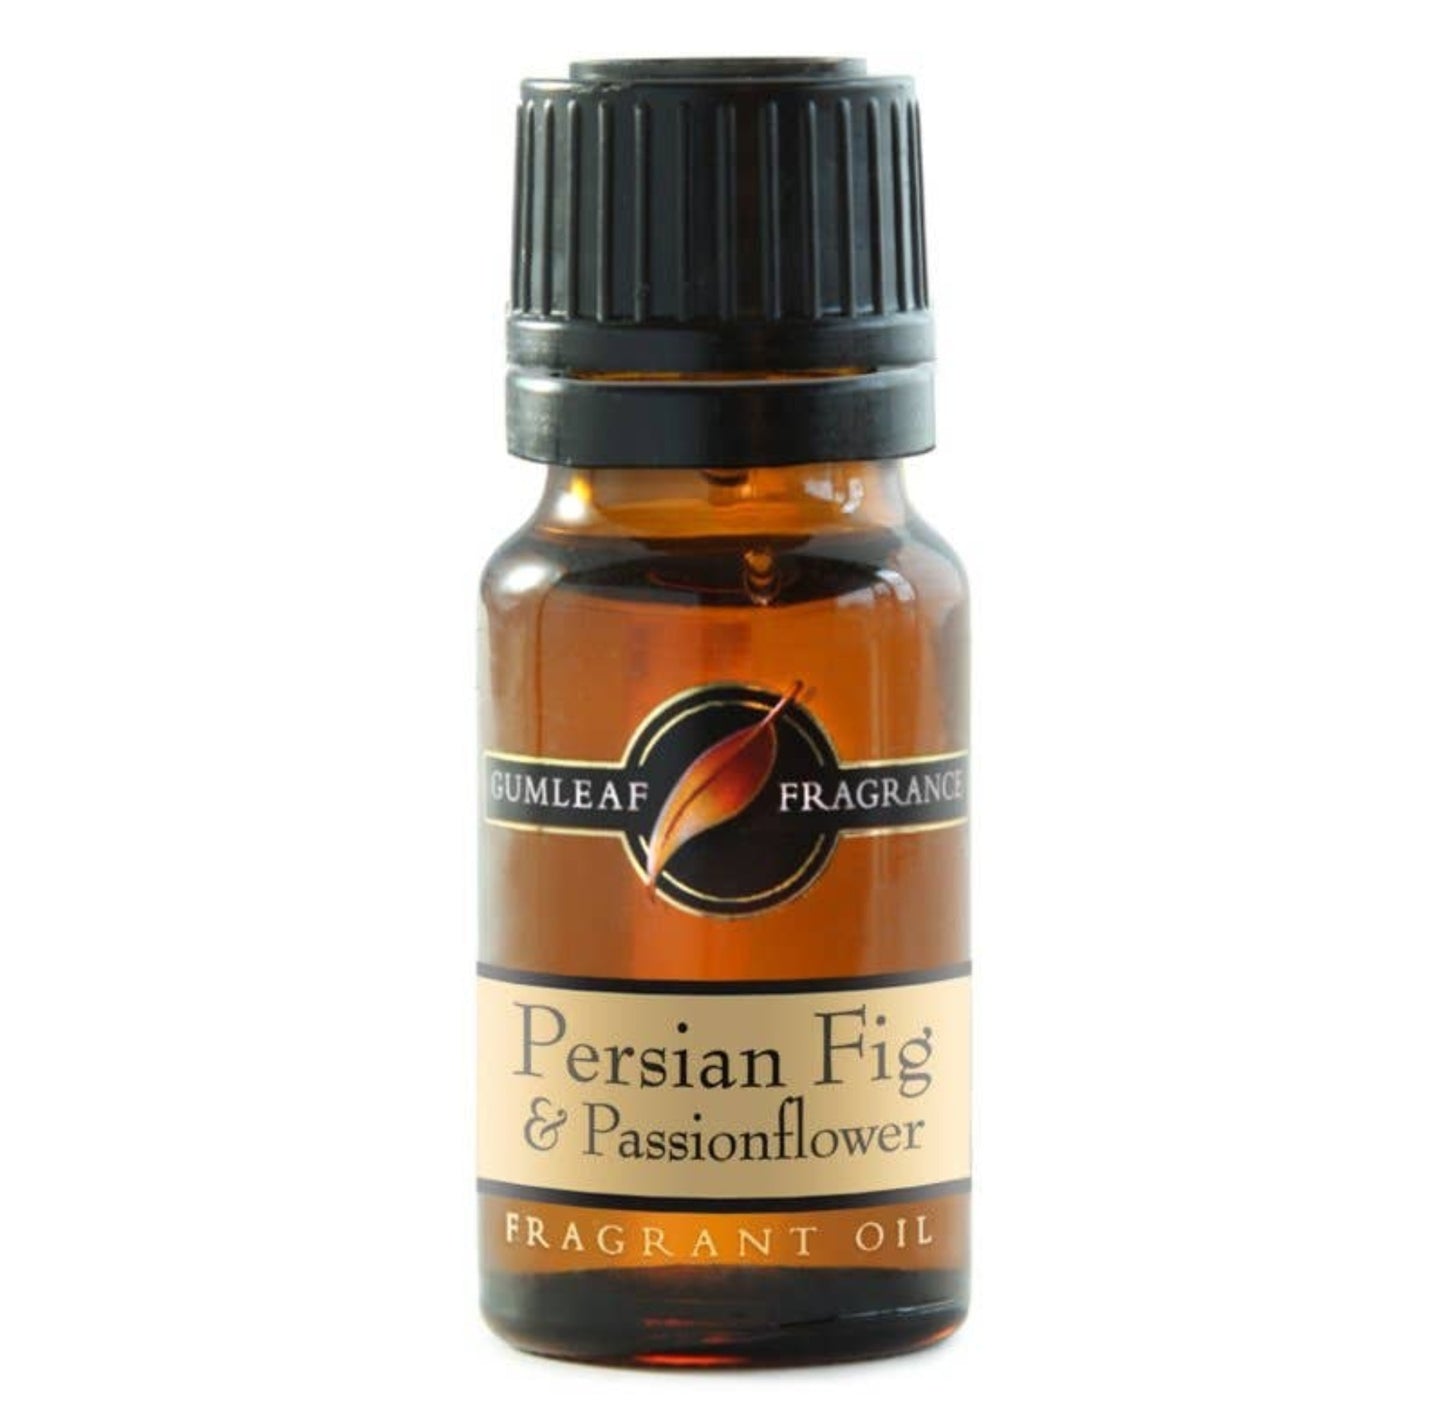 Persian Fig & Passionflower Fragrance Oil